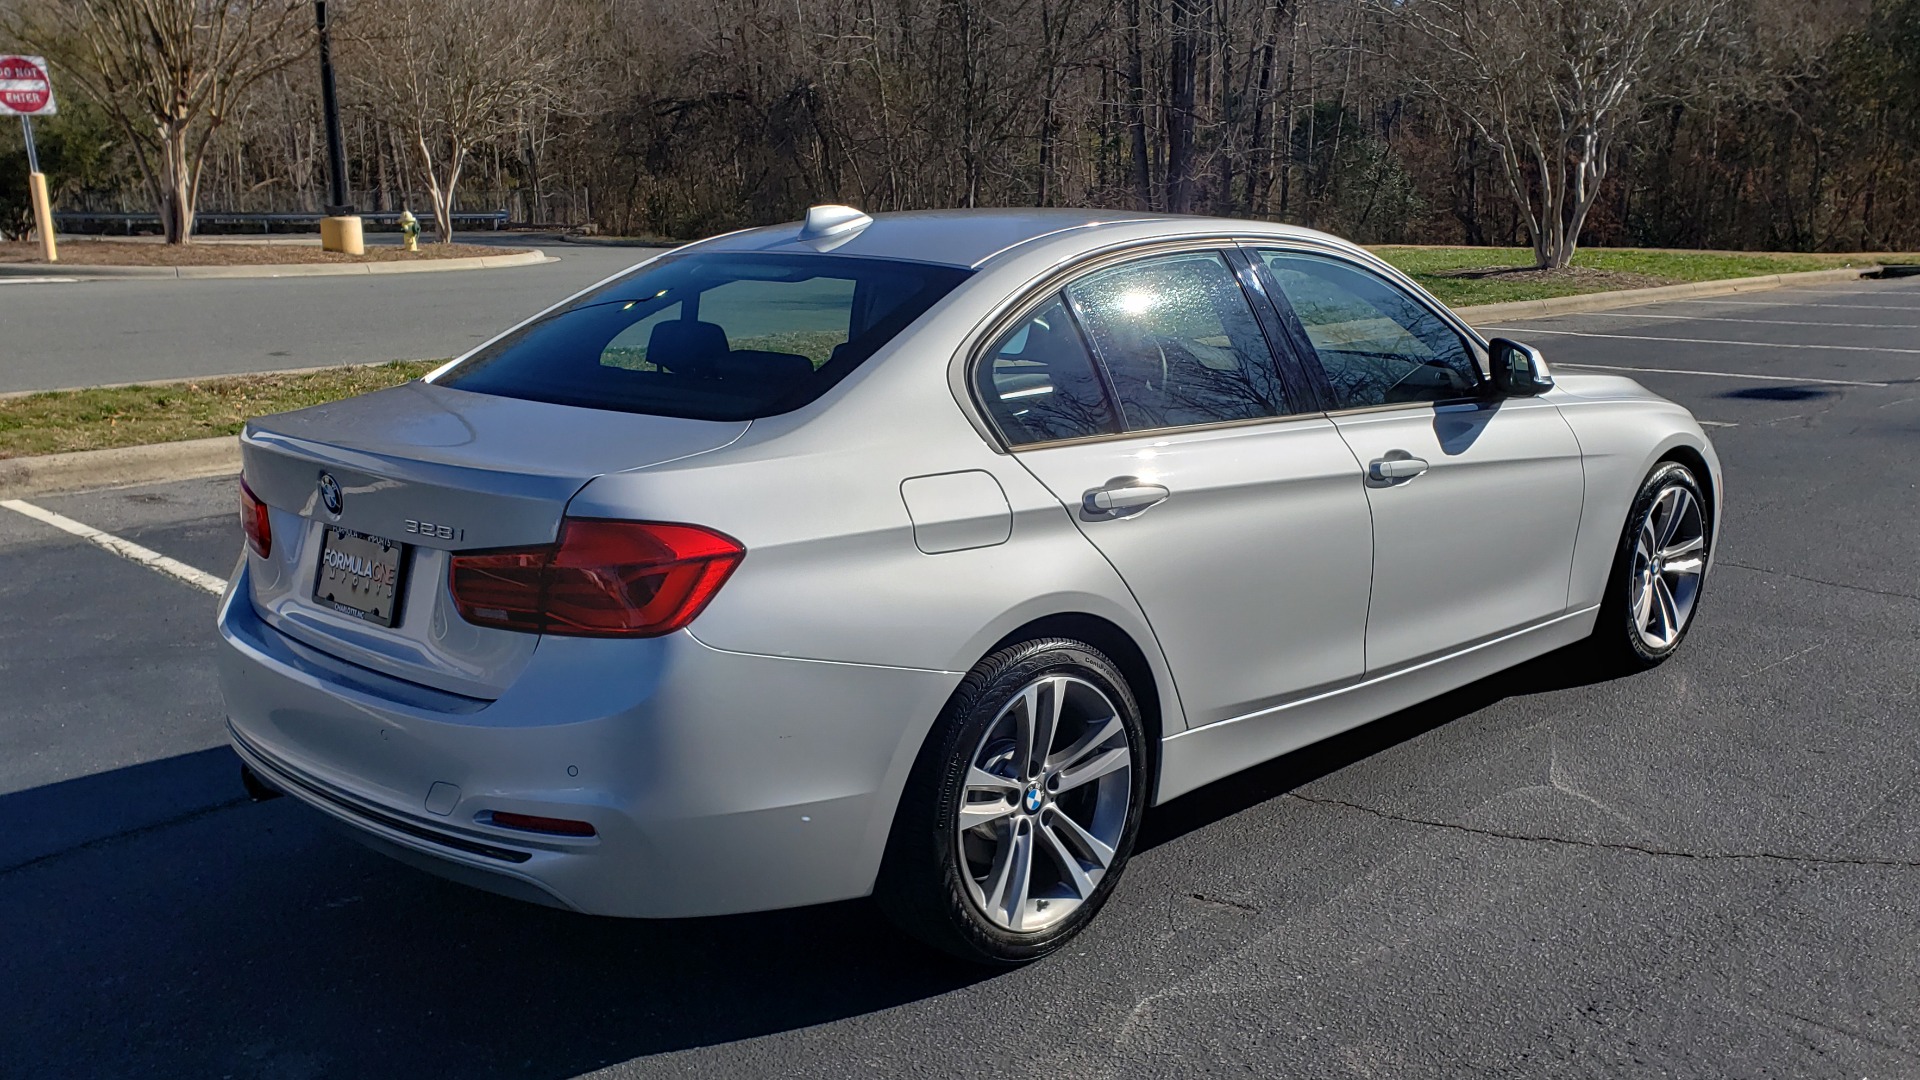 Used 2016 BMW 3 SERIES 328I / DRVR ASST / SUNROOF / REARVIEW / 18IN ALLOY WHLS for sale Sold at Formula Imports in Charlotte NC 28227 5